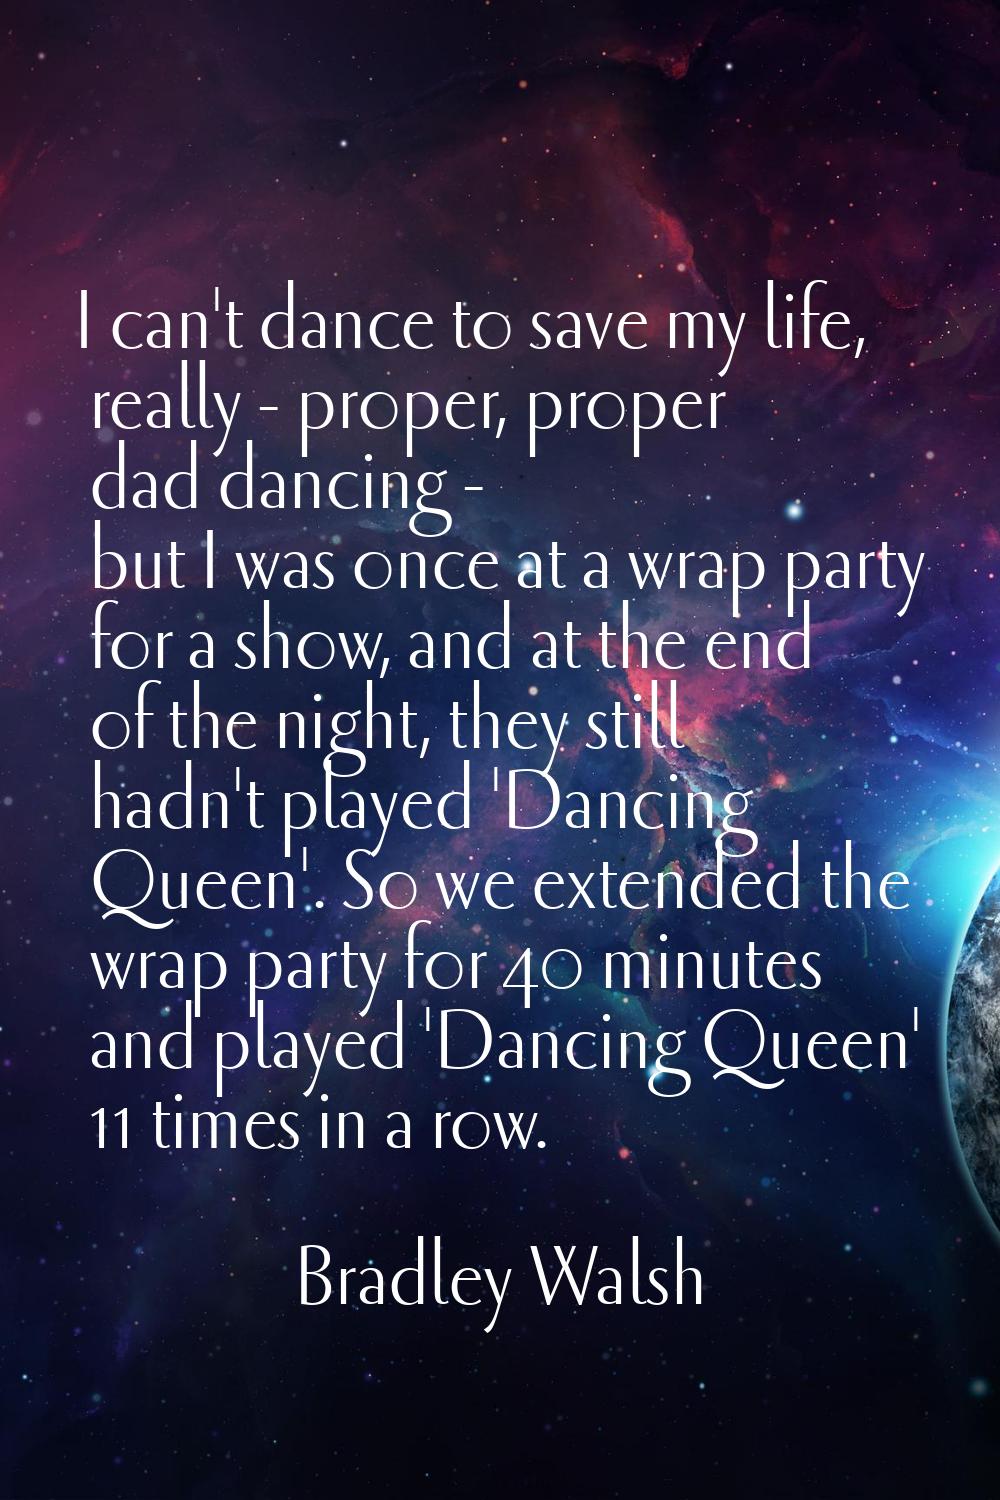 I can't dance to save my life, really - proper, proper dad dancing - but I was once at a wrap party